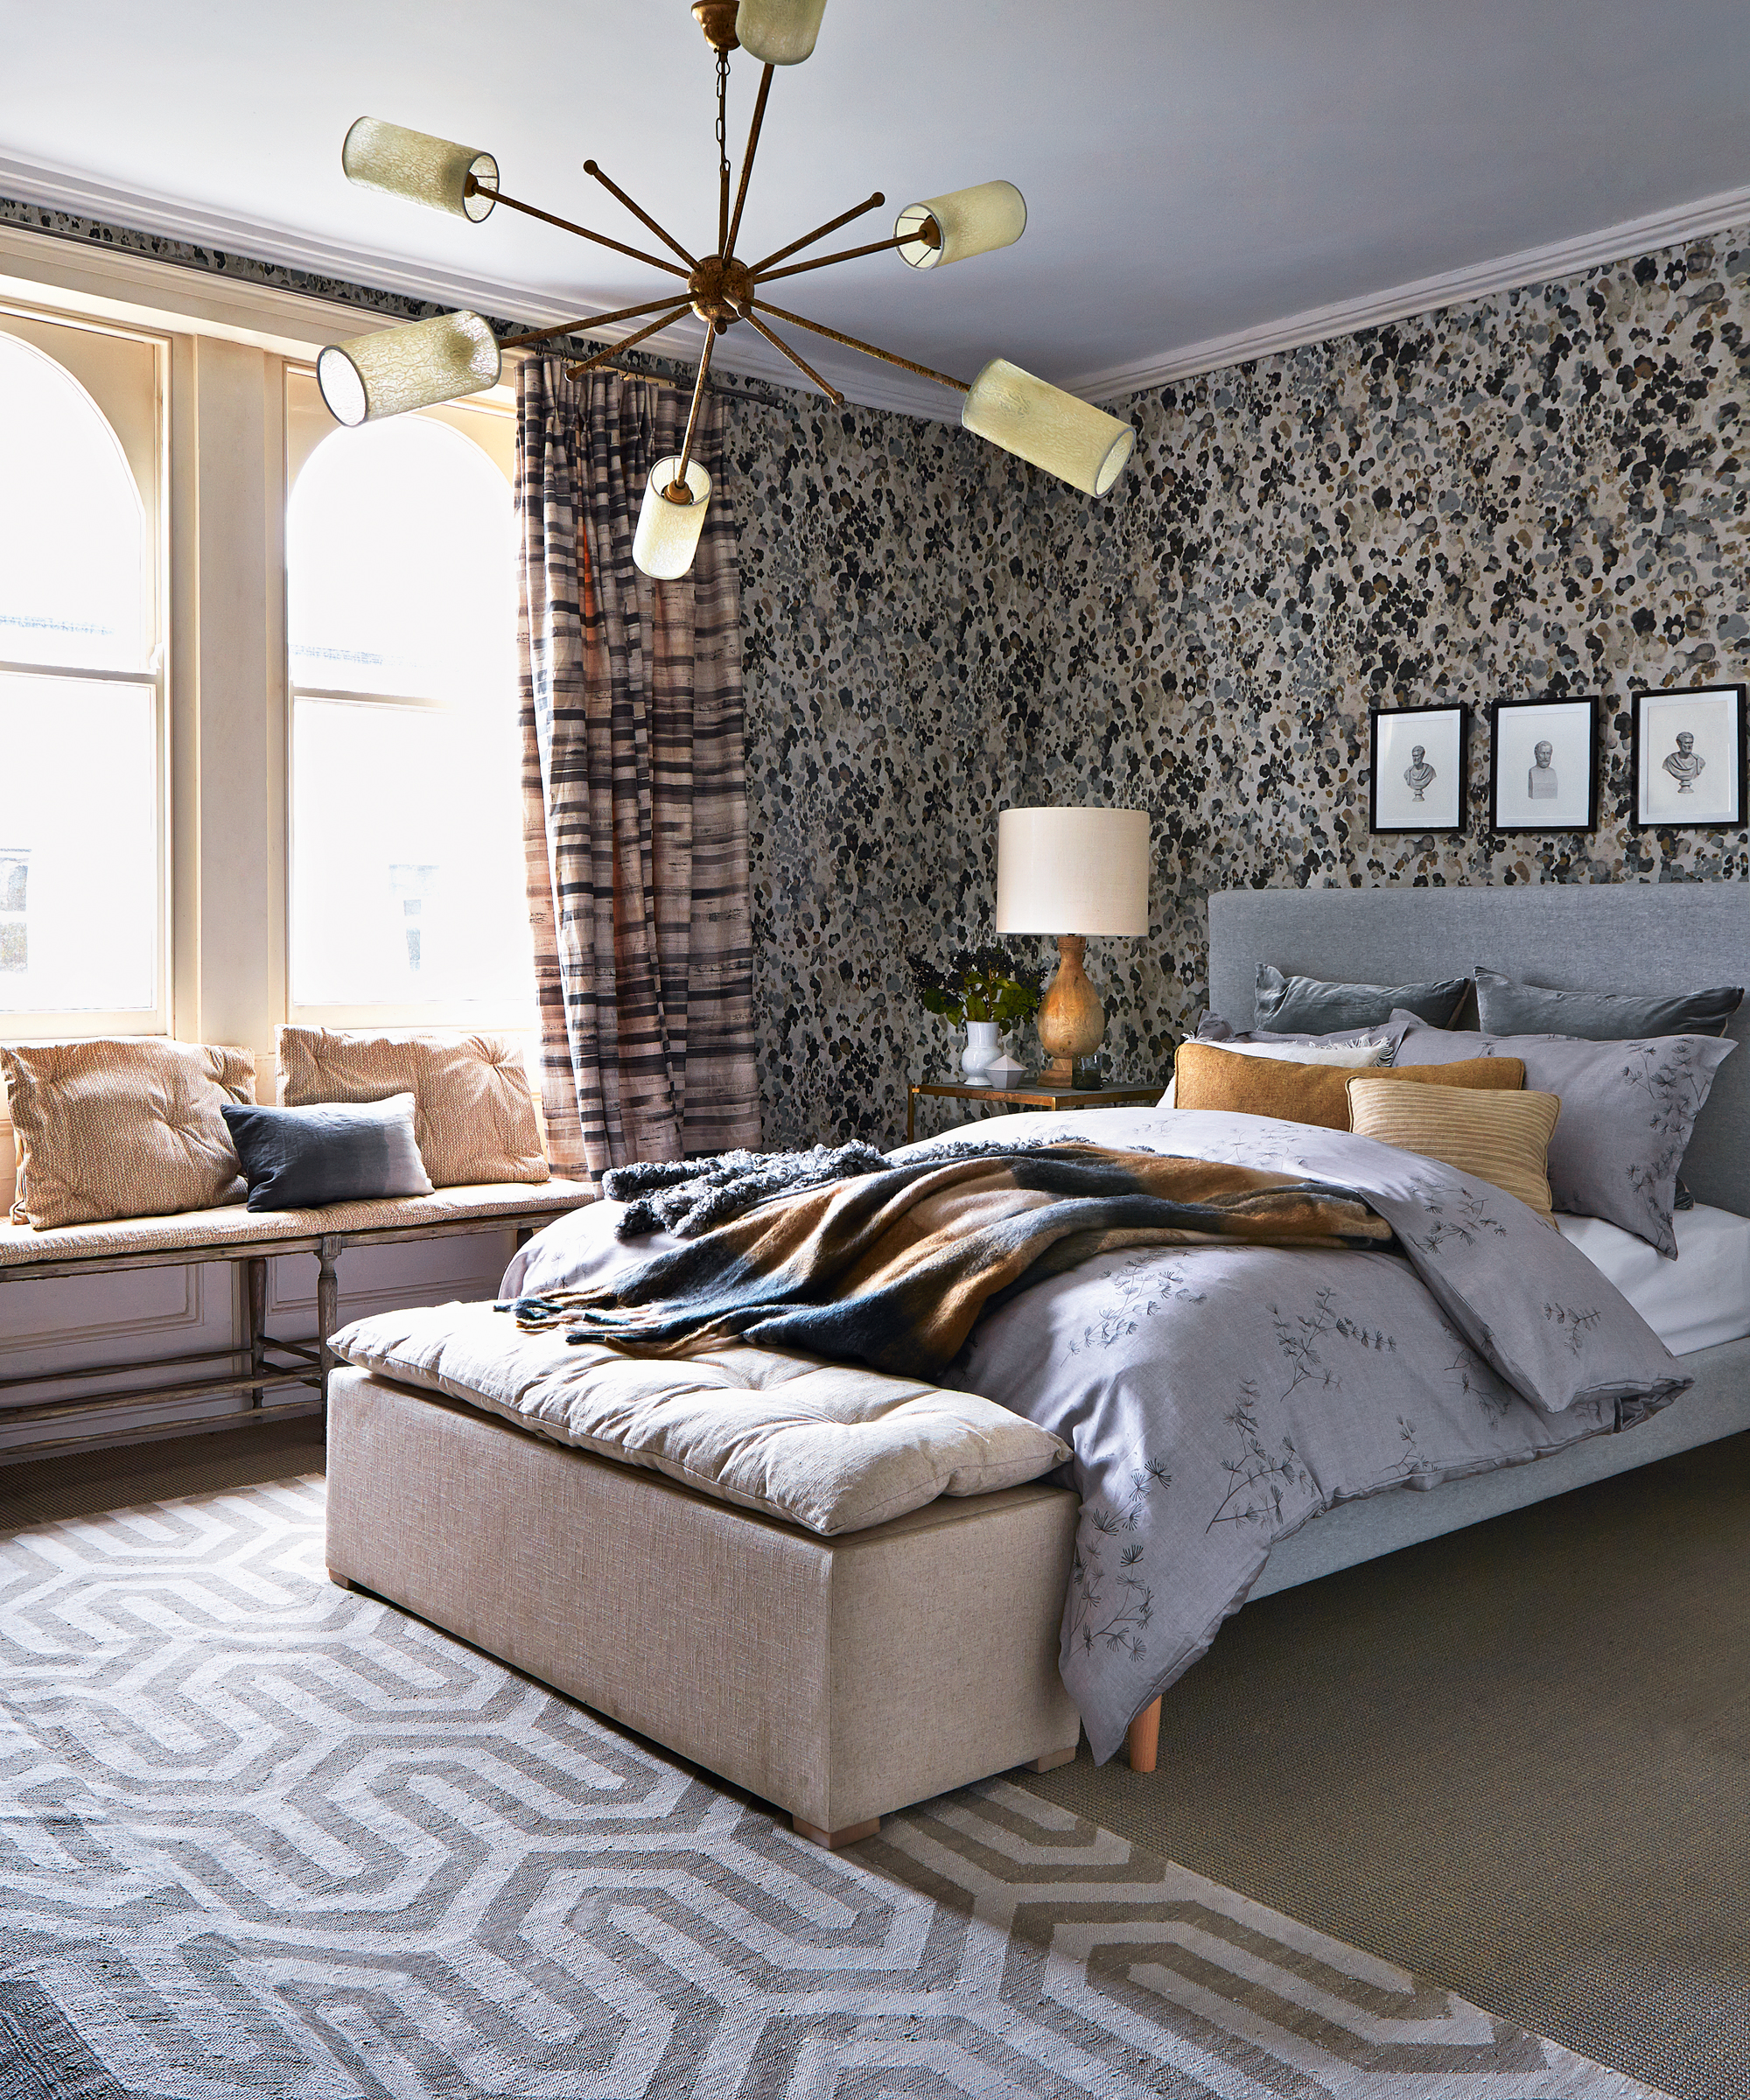 A grey bedroom idea with patterned wallpaper, curtains, rug and bed linen